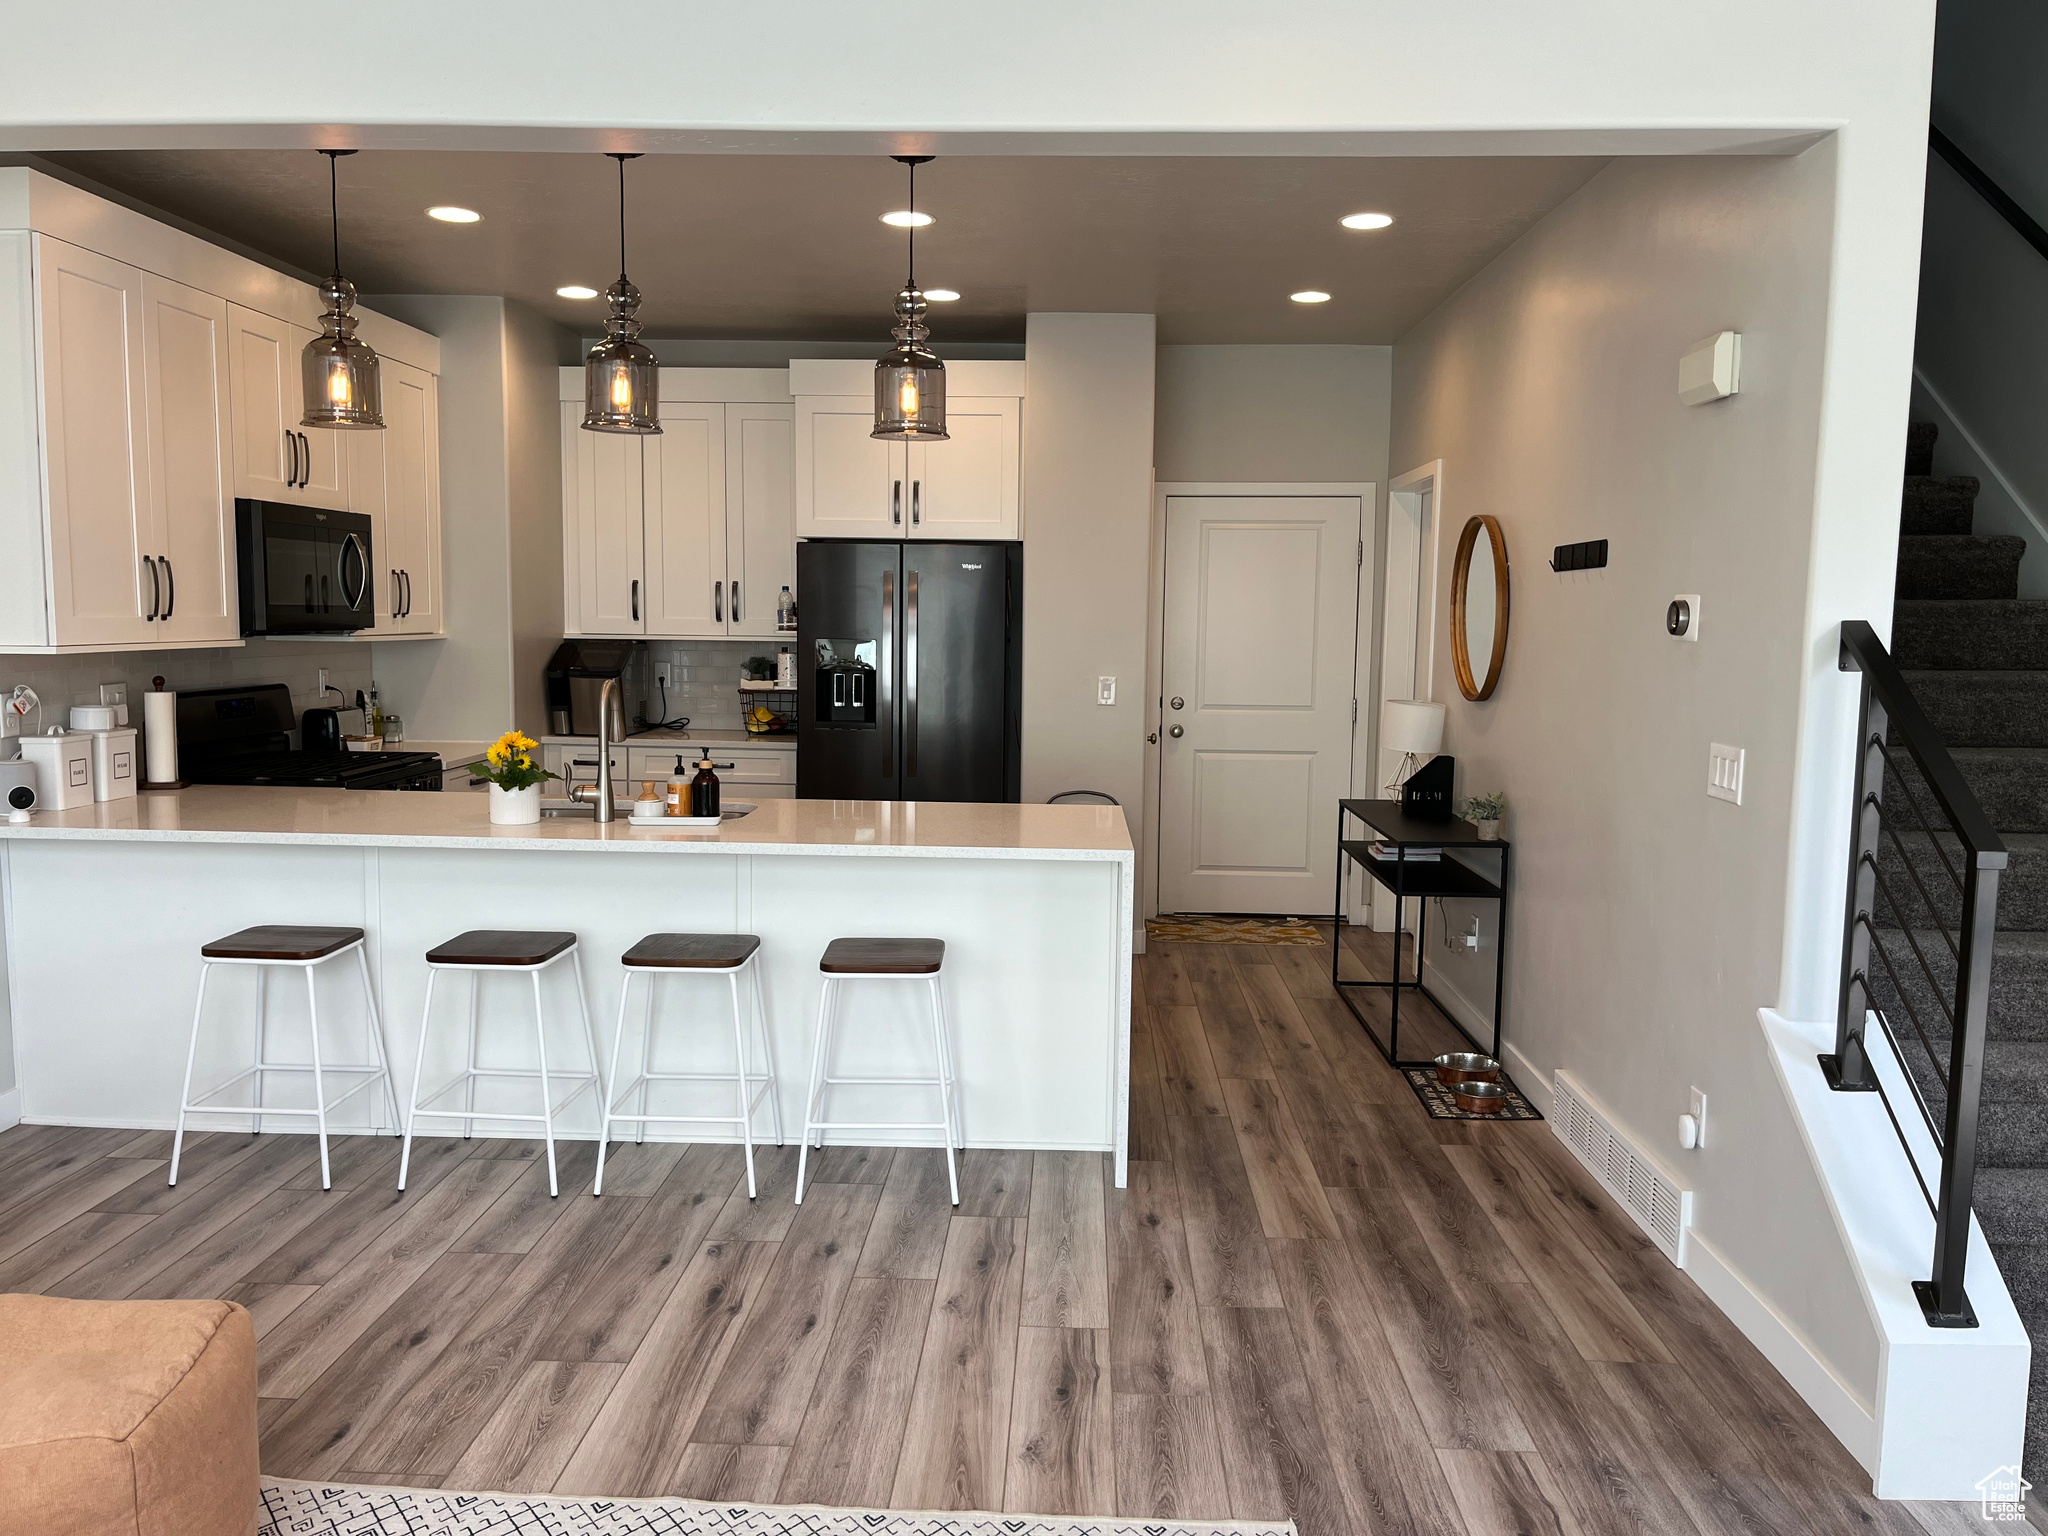 Kitchen featuring hardwood / wood-style flooring, white cabinetry, stainless steel fridge, and range